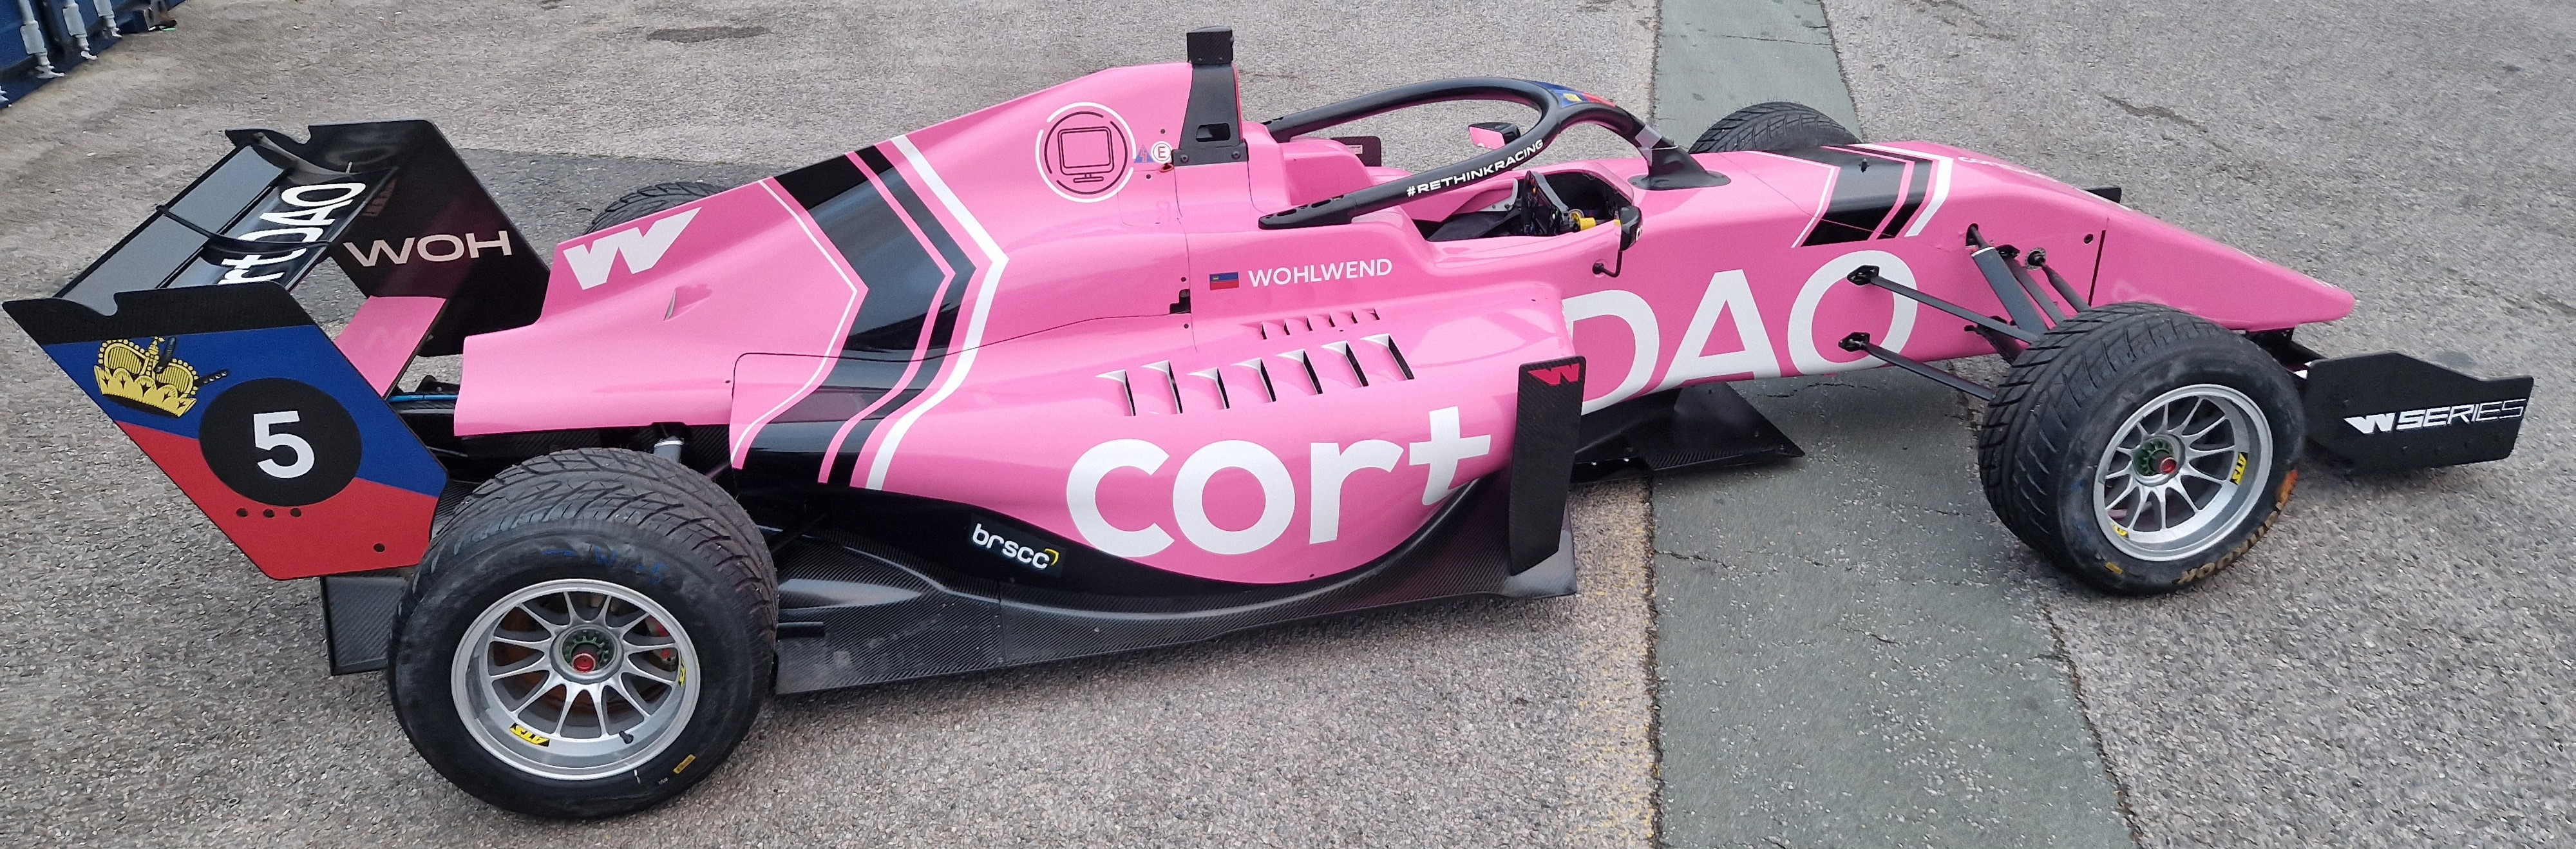 One TATUUS F3 T-318 Alfa Romeo Race Car Chassis No. 082 (2019) Finished in cortDAO Livery as - Image 2 of 10